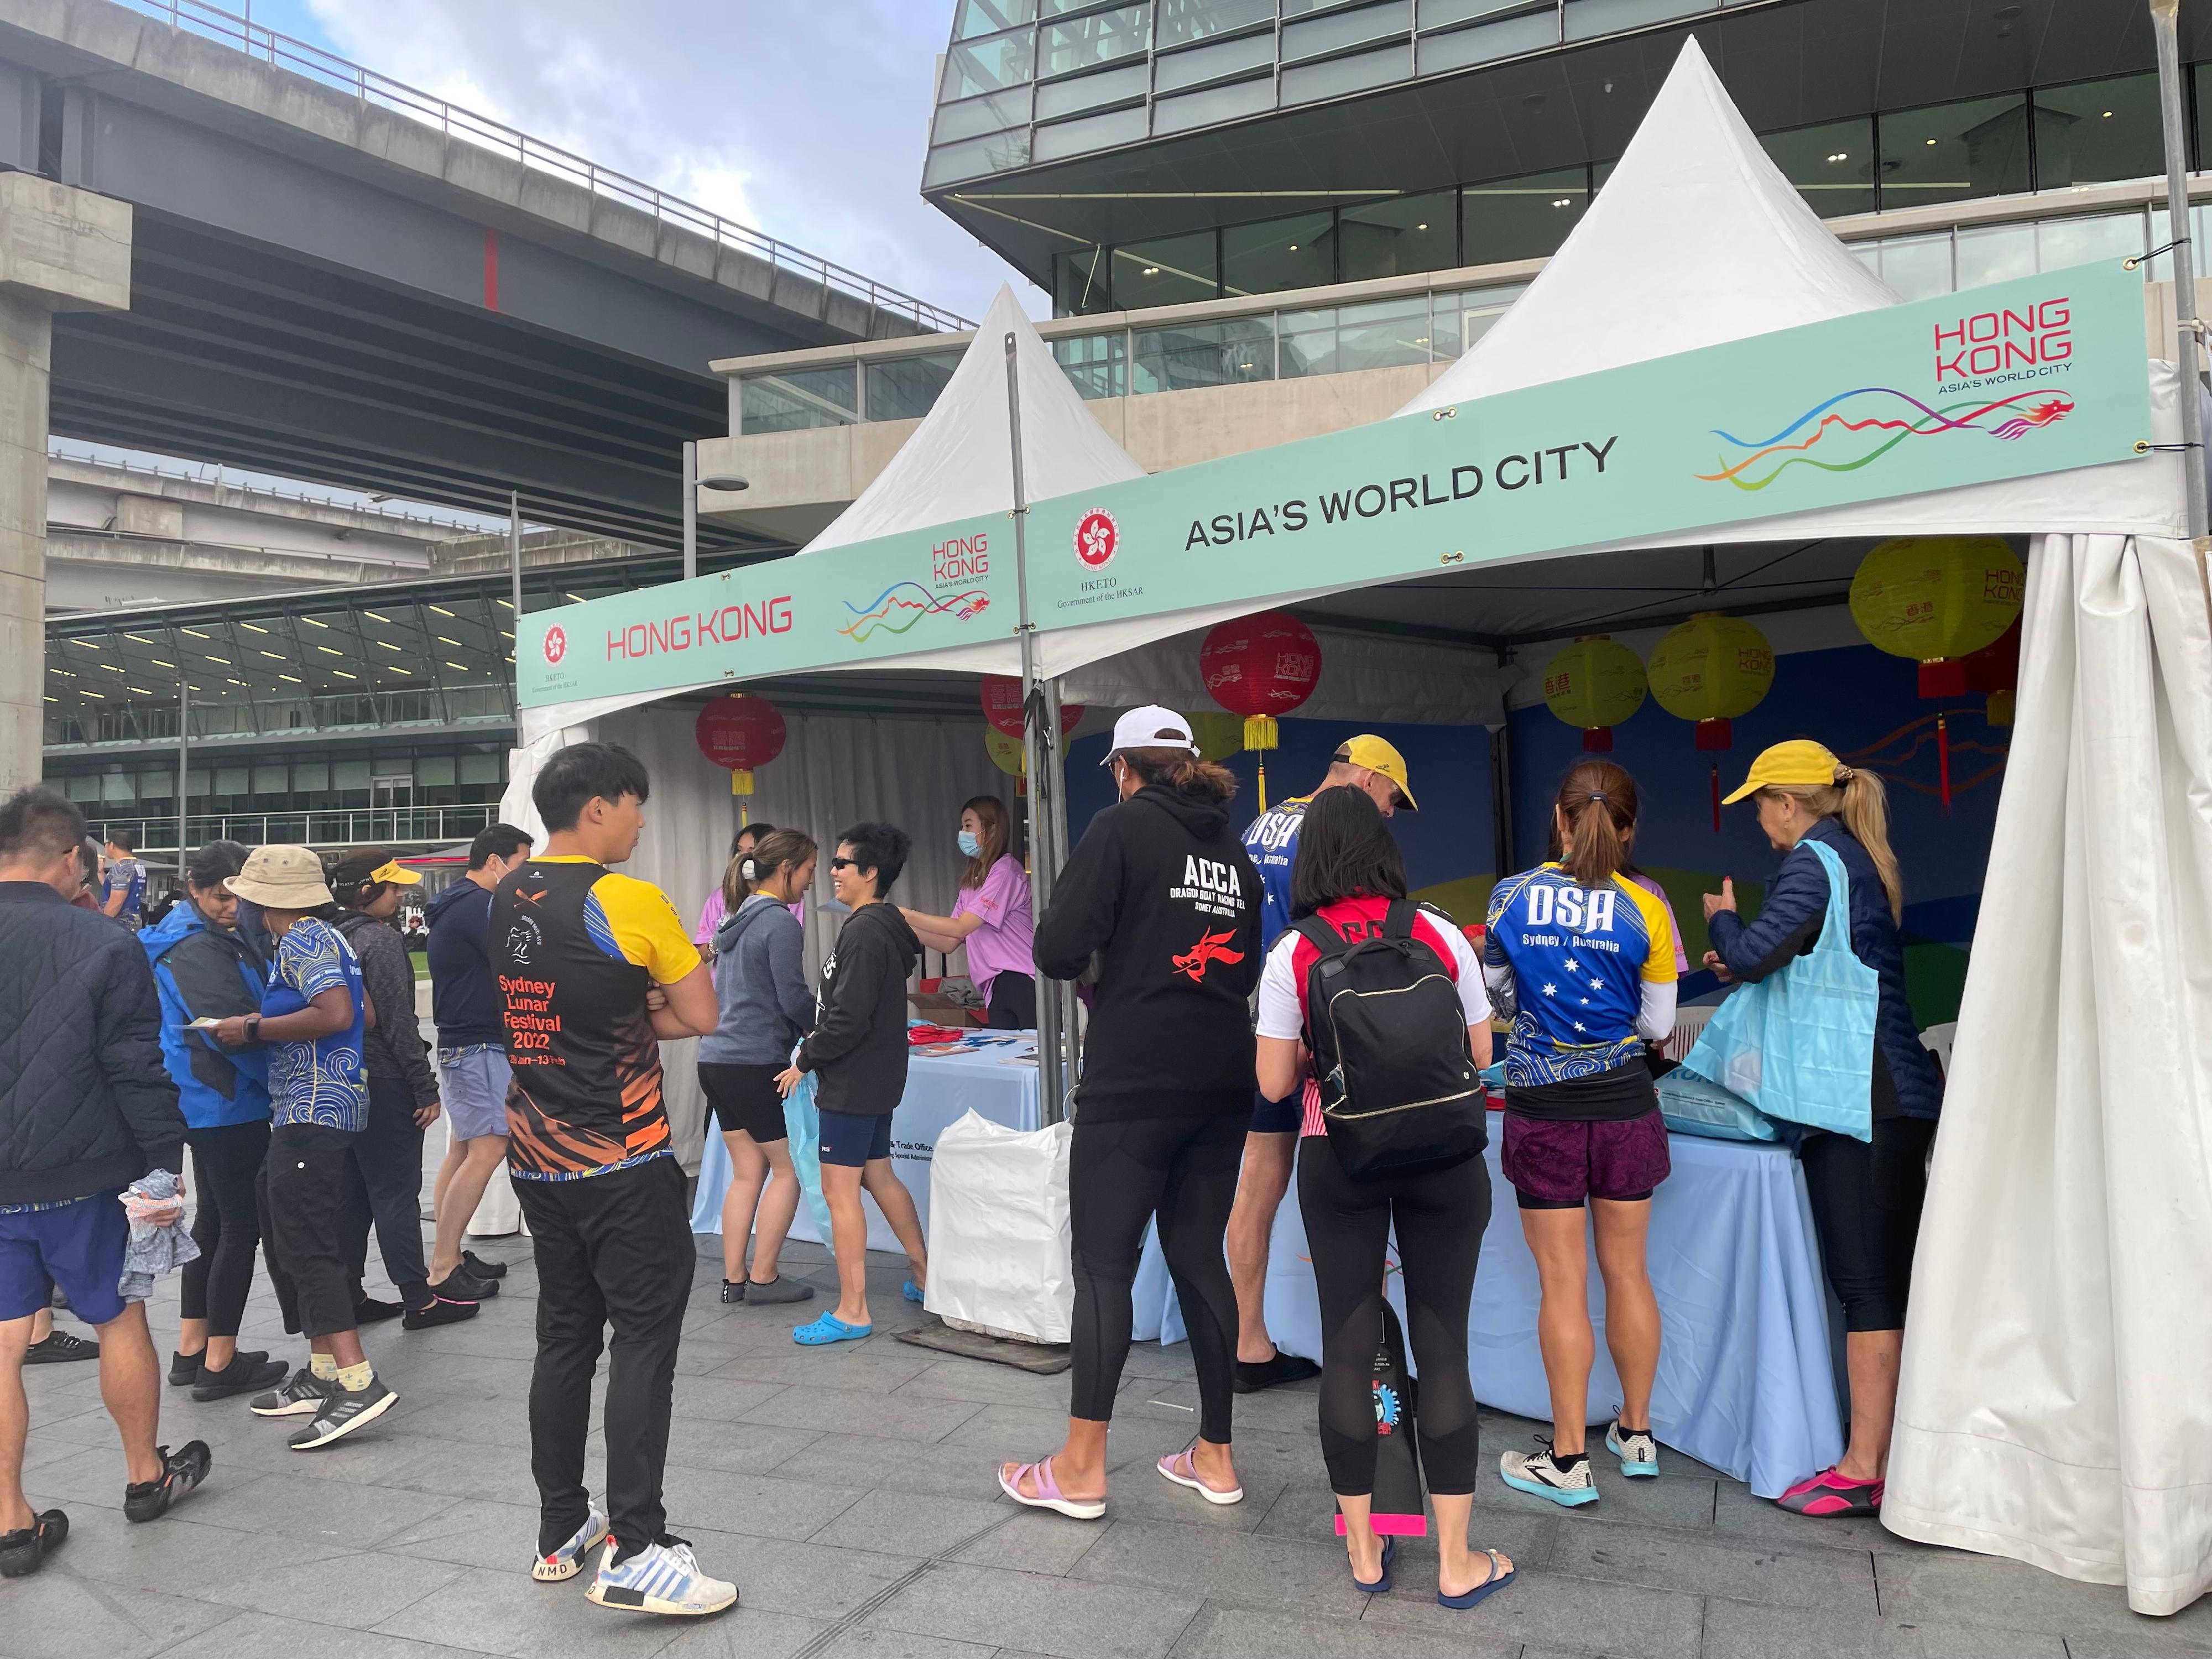 The Hong Kong Economic and Trade Office, Sydney (HKETO) participated in the Sydney Lunar Festival Dragon Boat Races in Sydney, Australia on February 5 and 6. The HKETO set up a marquee in Darling Harbour, where visitors learned more about the latest developments of Hong Kong through pamphlets and leaflets.